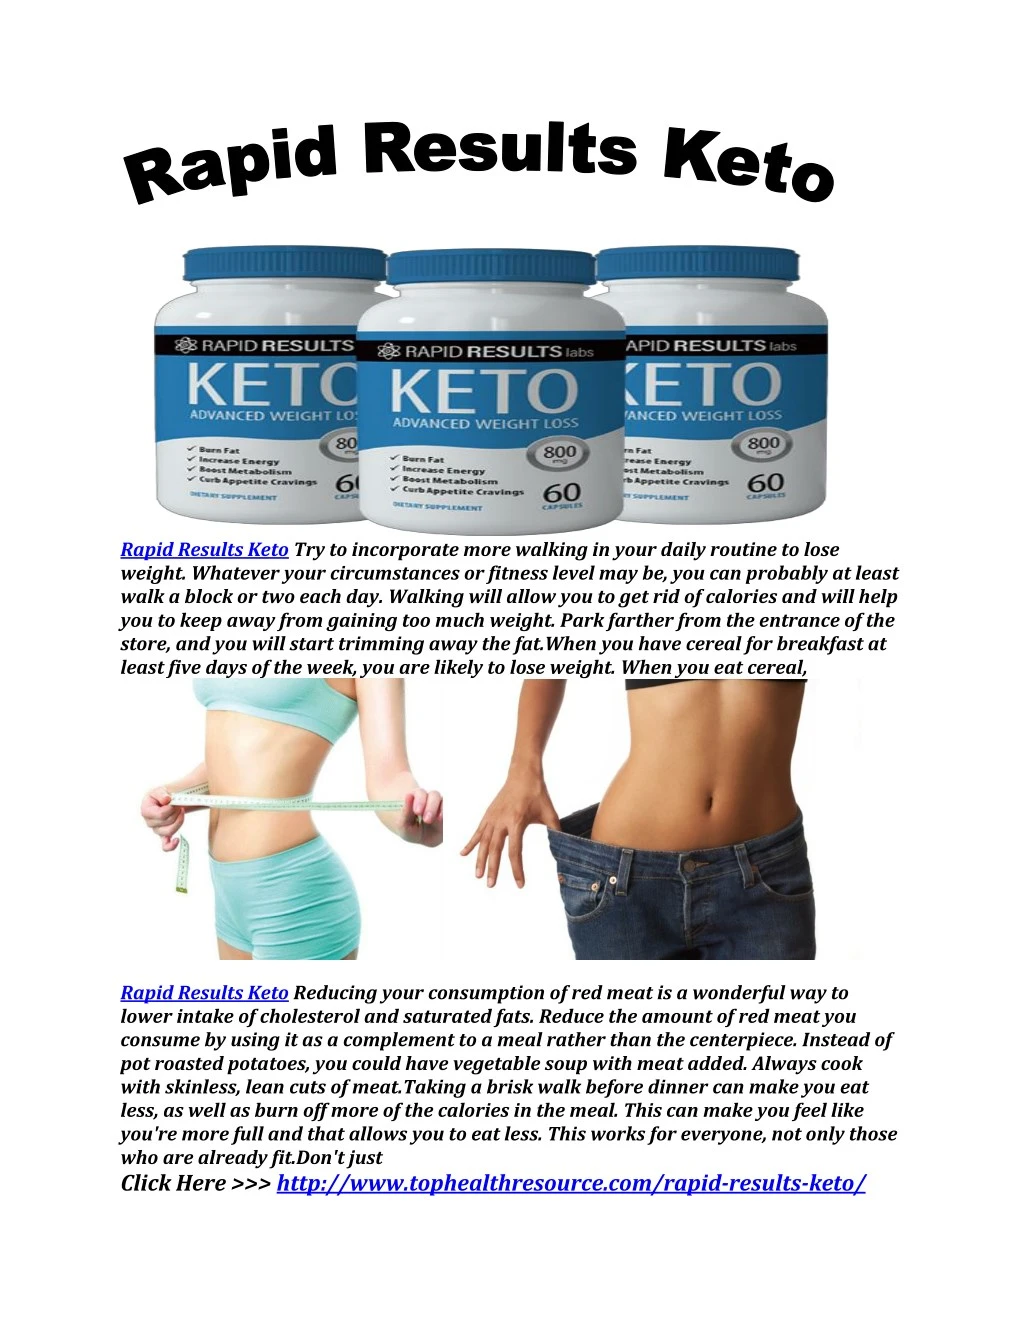 rapid results keto try to incorporate more